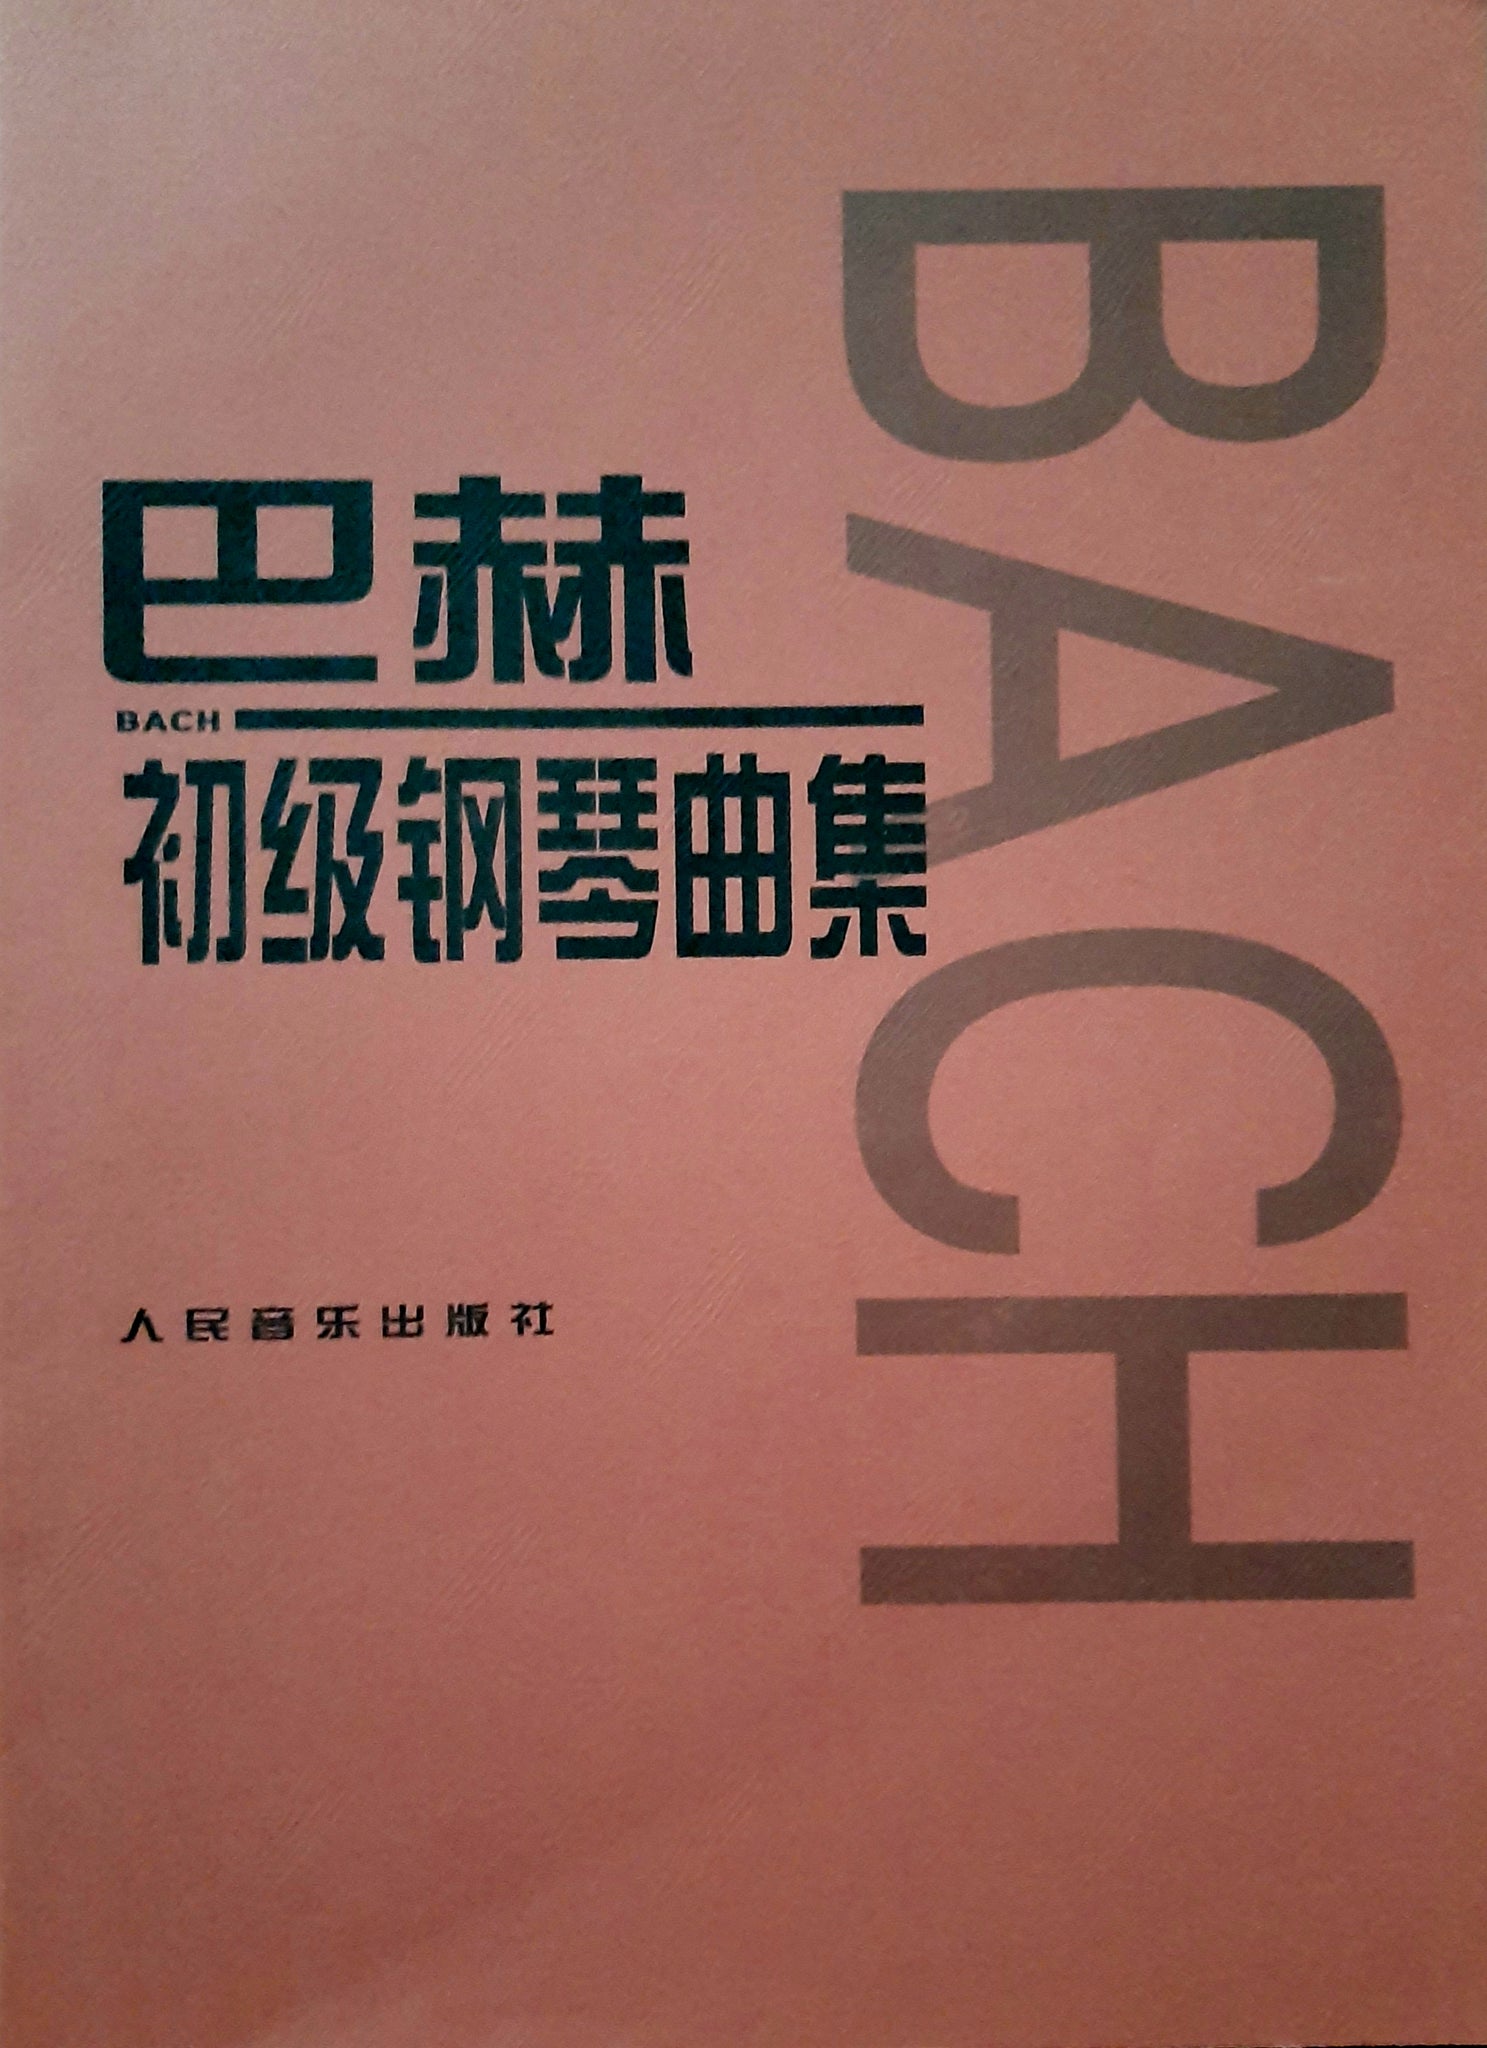 Piano study book: Bach First Lessons  巴赫  初级钢琴曲集